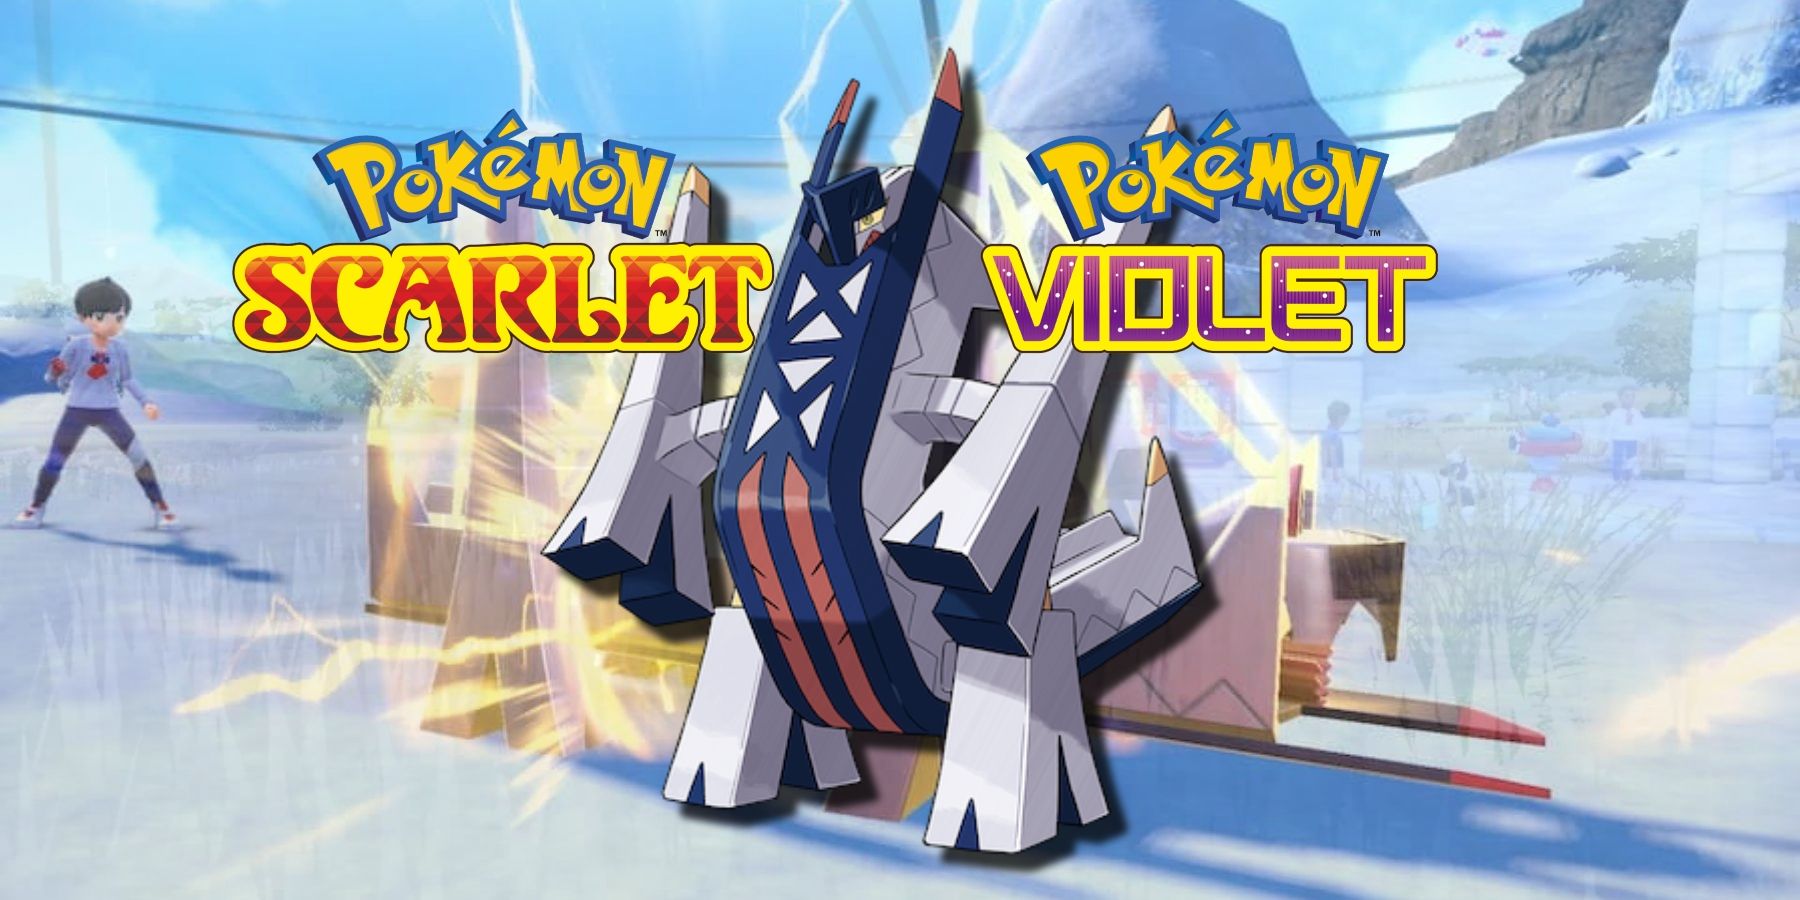 Archaludon’s Game-Changing Move: Pokemon Scarlet and Violet Indigo Disk Breaks Big Series Tradition